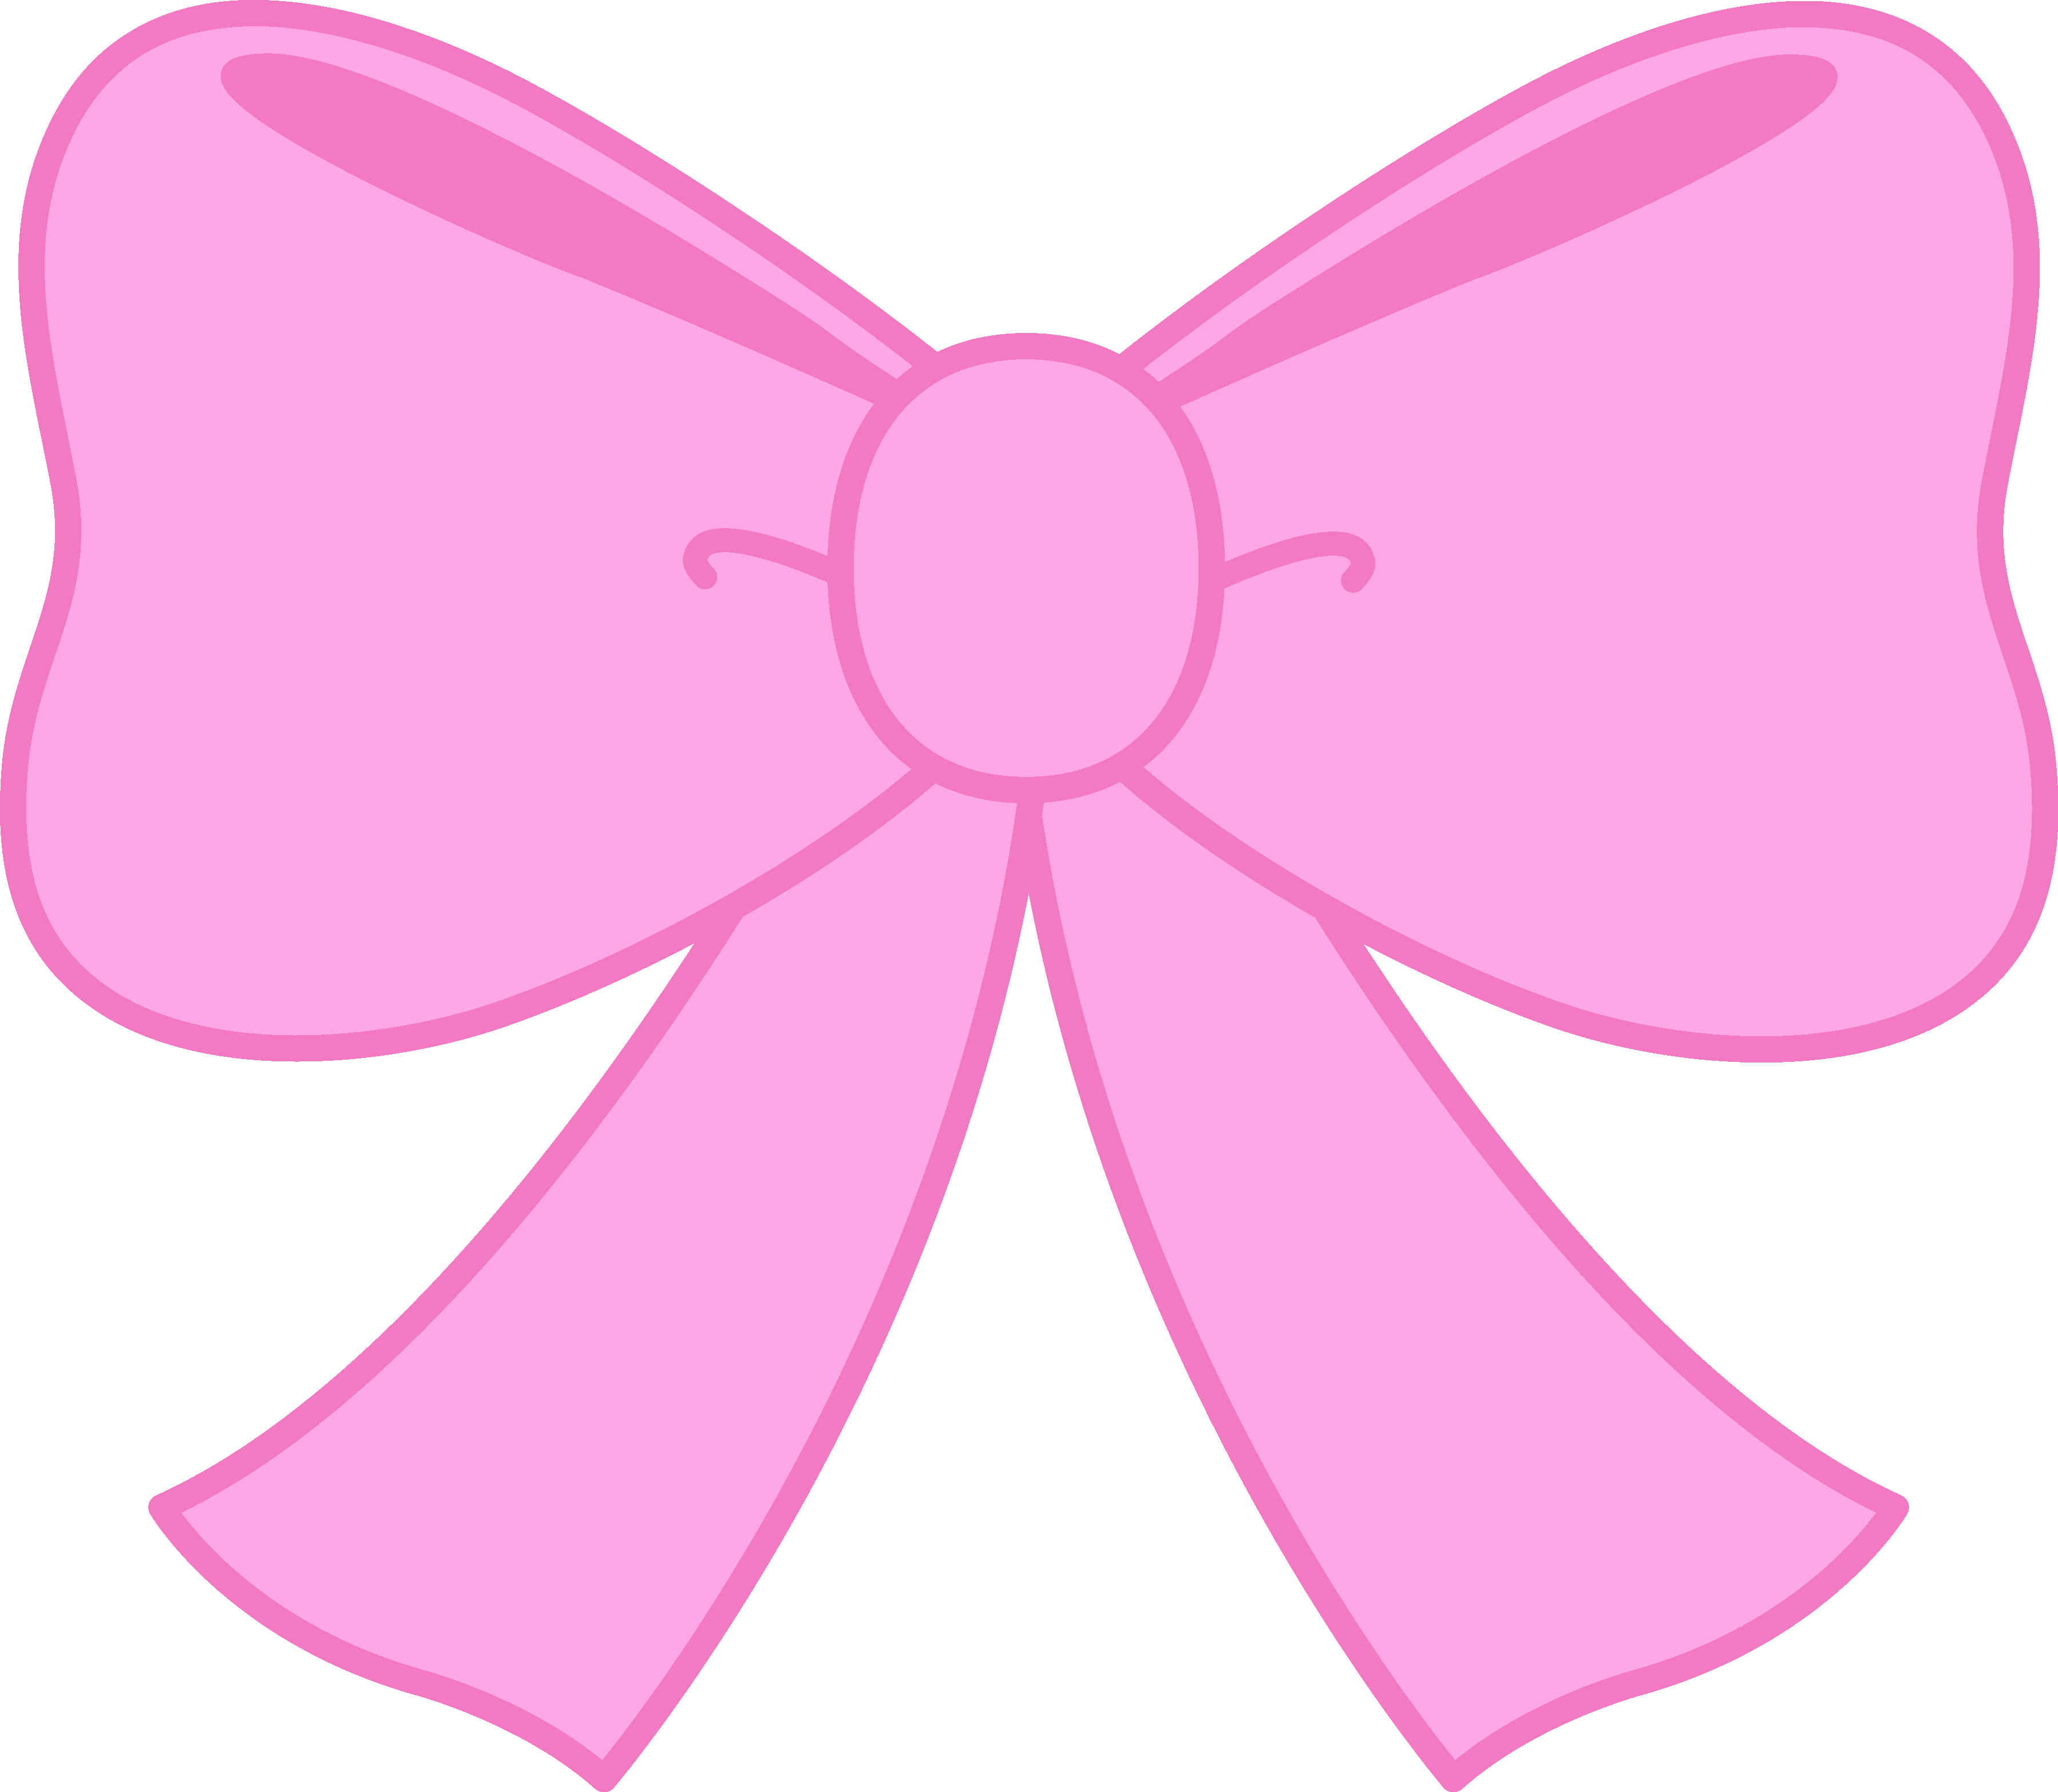 Pink Bow Pictures - Cliparts.co